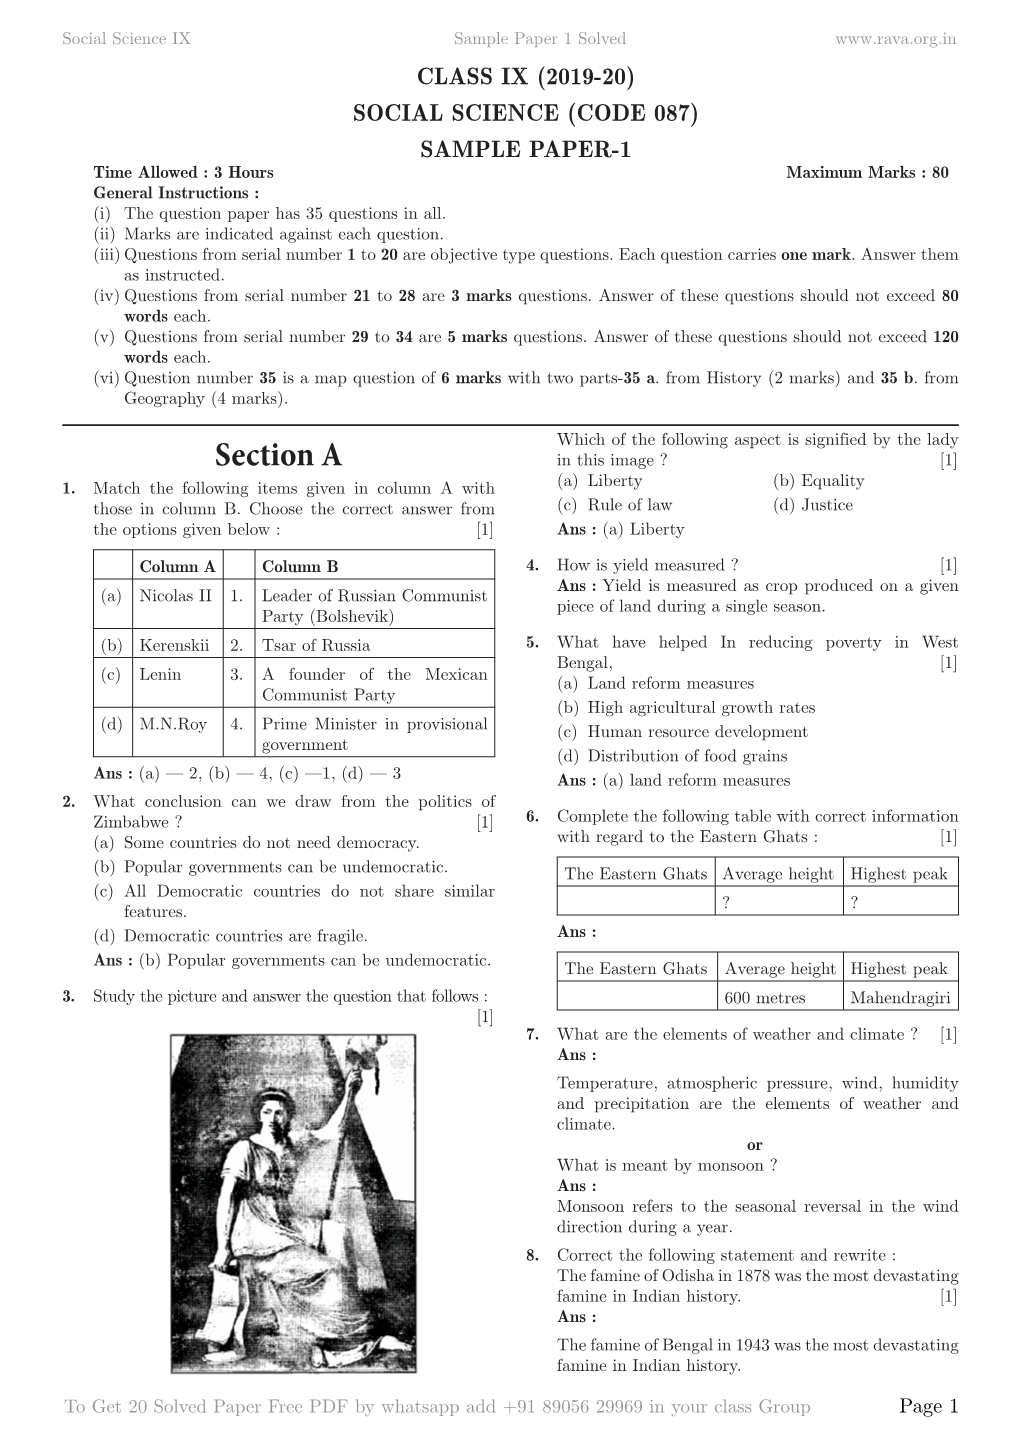 Class-Ix-Social-Science-Latest-Sample-Papers-2019-20-Solved